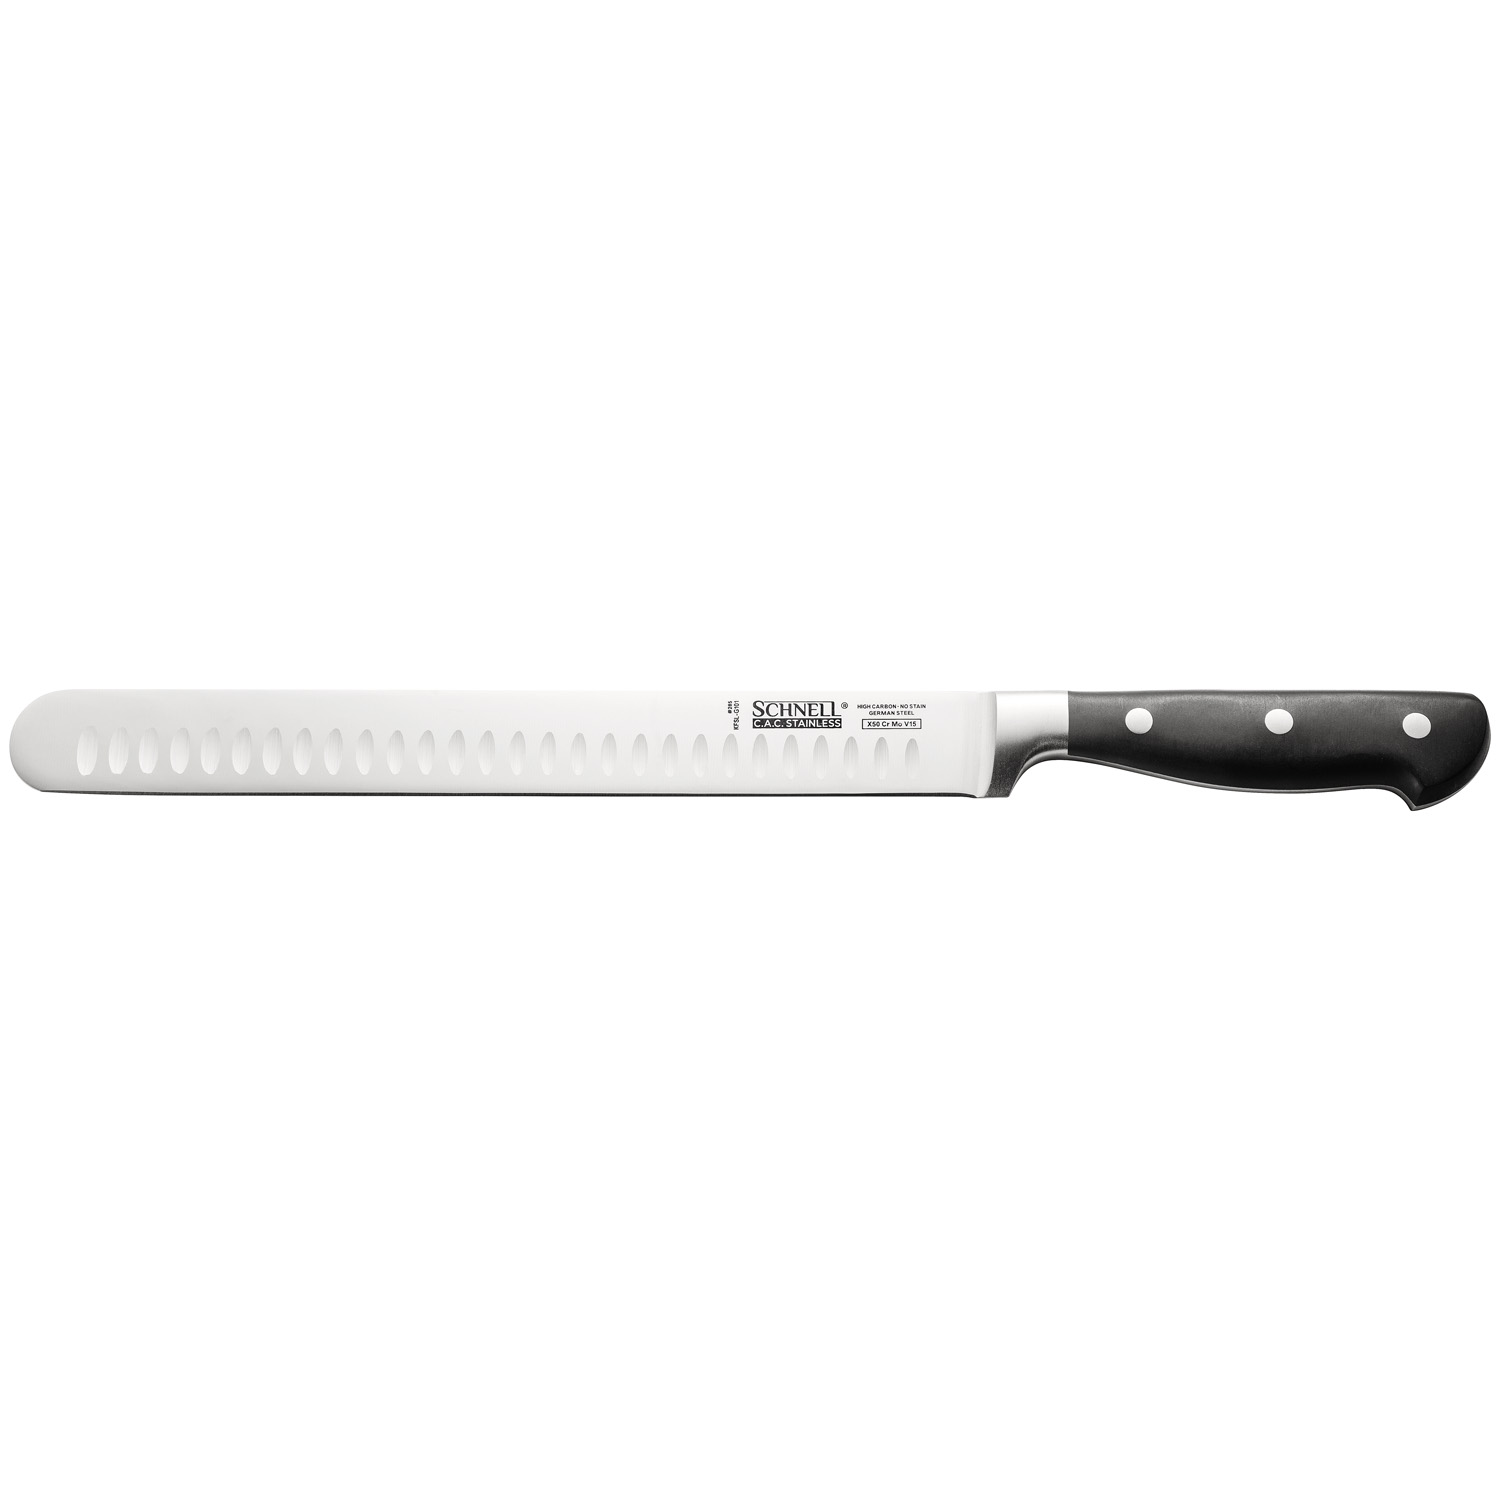 CAC China KFSL-G101 Schnell Slicing Knife with Granton Edge 10"